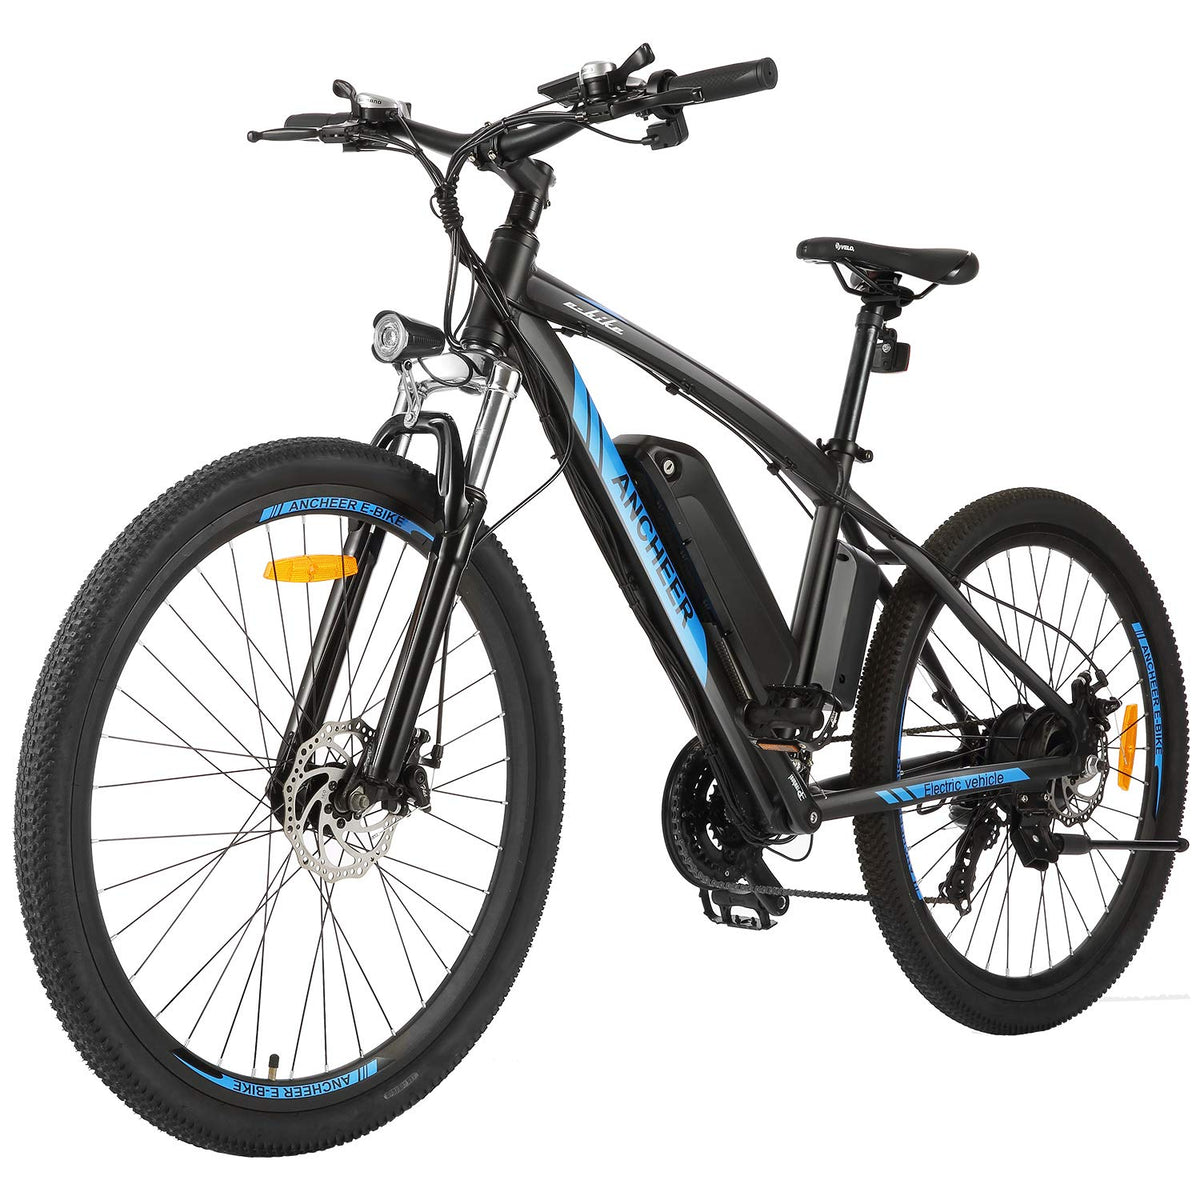 ANCHEER 350/500W Electric Bike 27.5'' Adults Electric Bicycle ... - 27.5Hummer 01 1200x1200